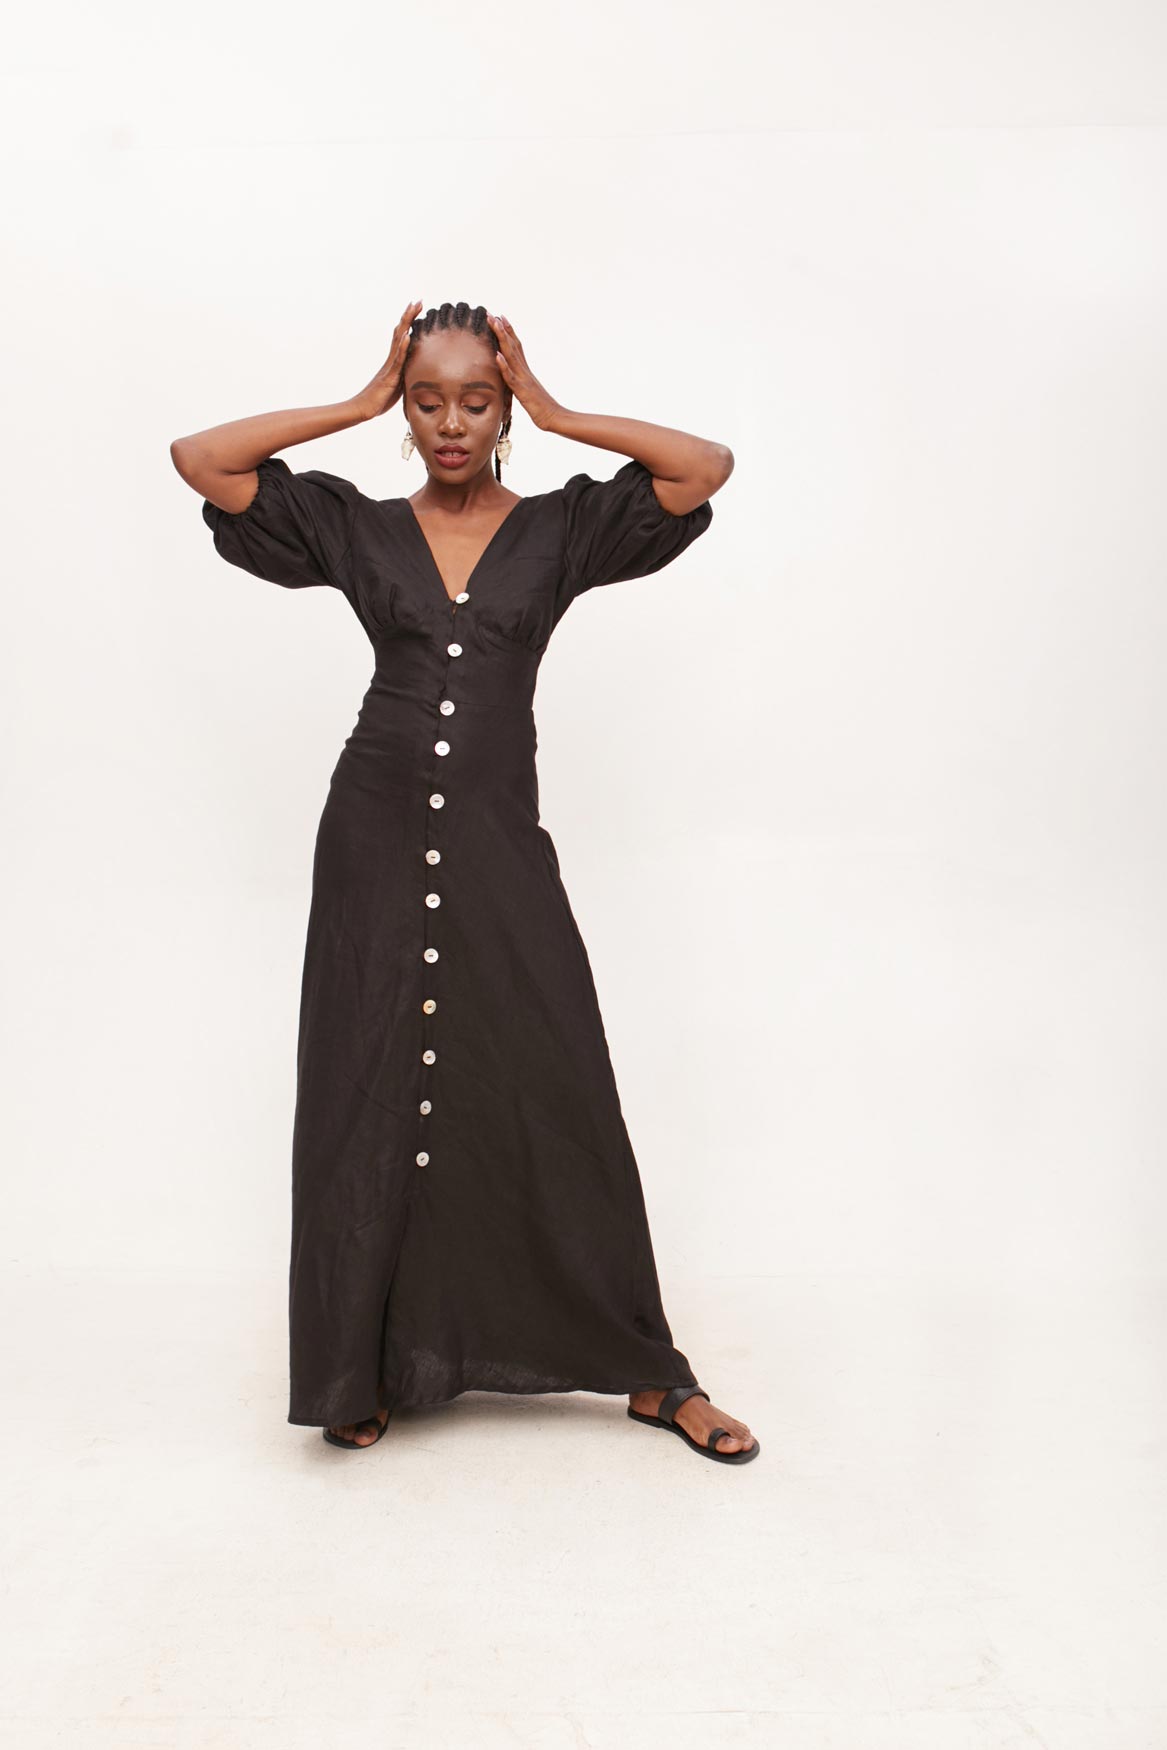 14 Places That Make Supporting Black Businesses With Fashion Your Super Power